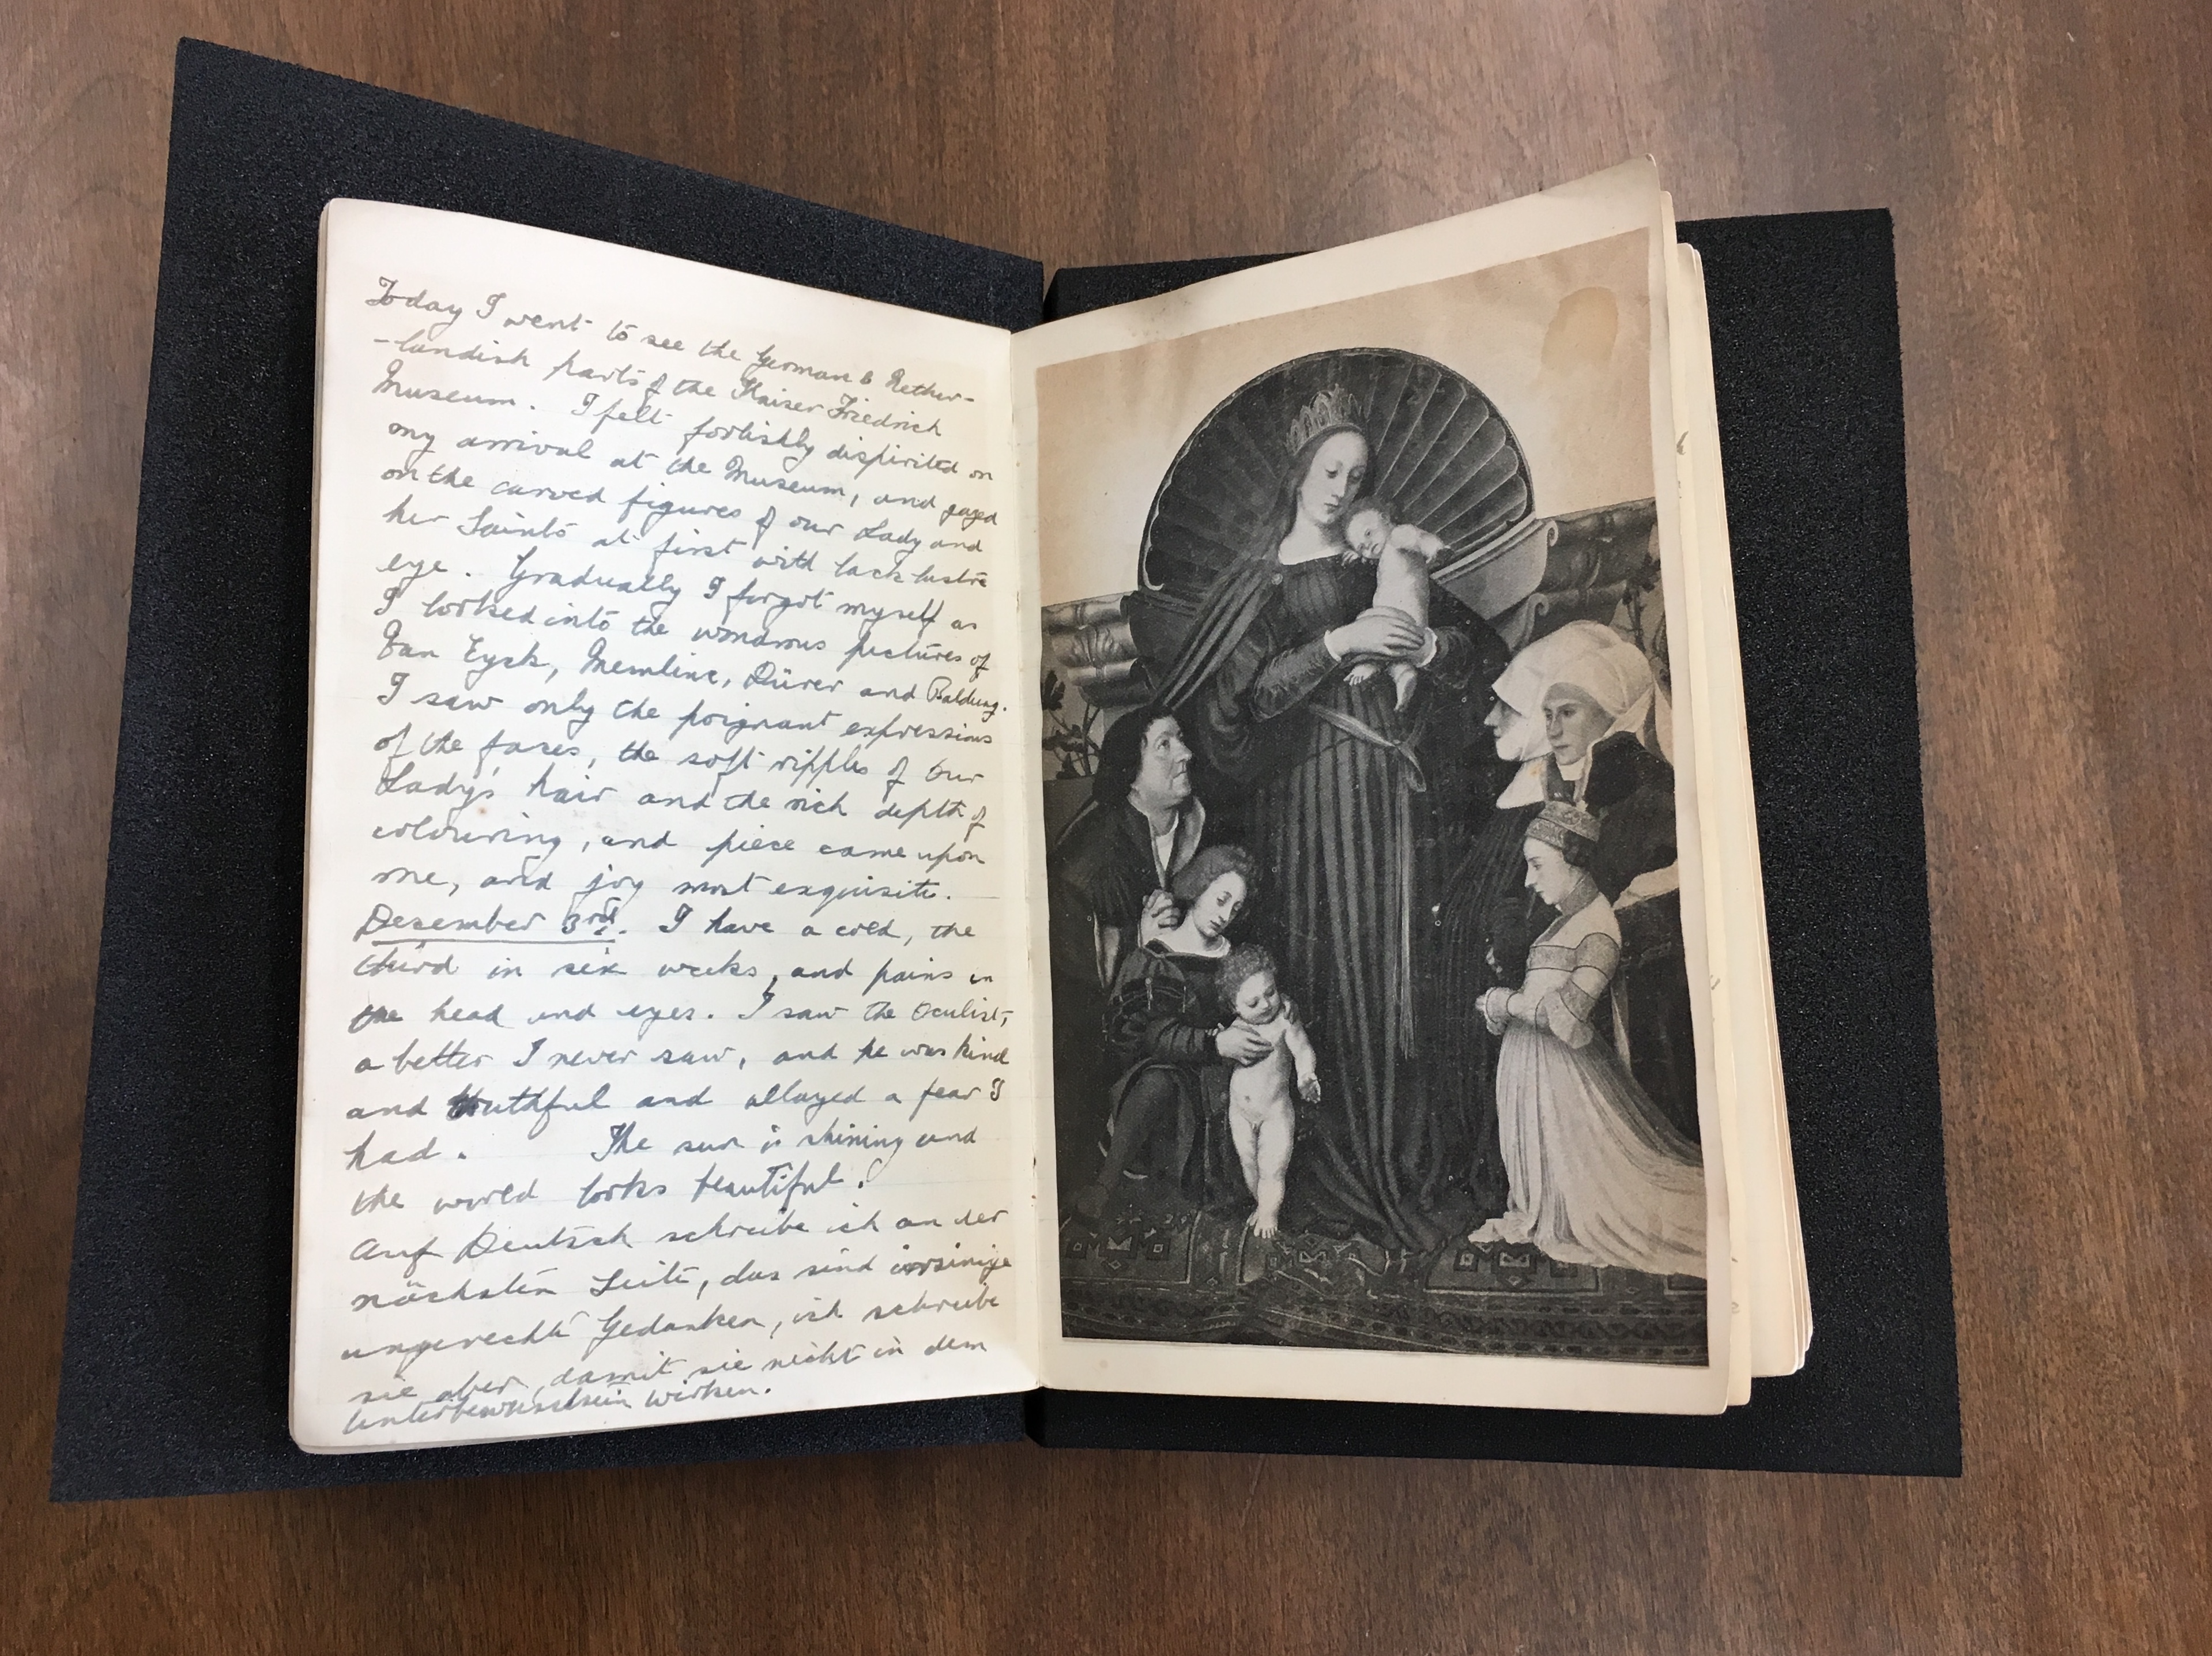 Open diary spread with hand-written entry on the left page and black and white photograph of Marian art on the right